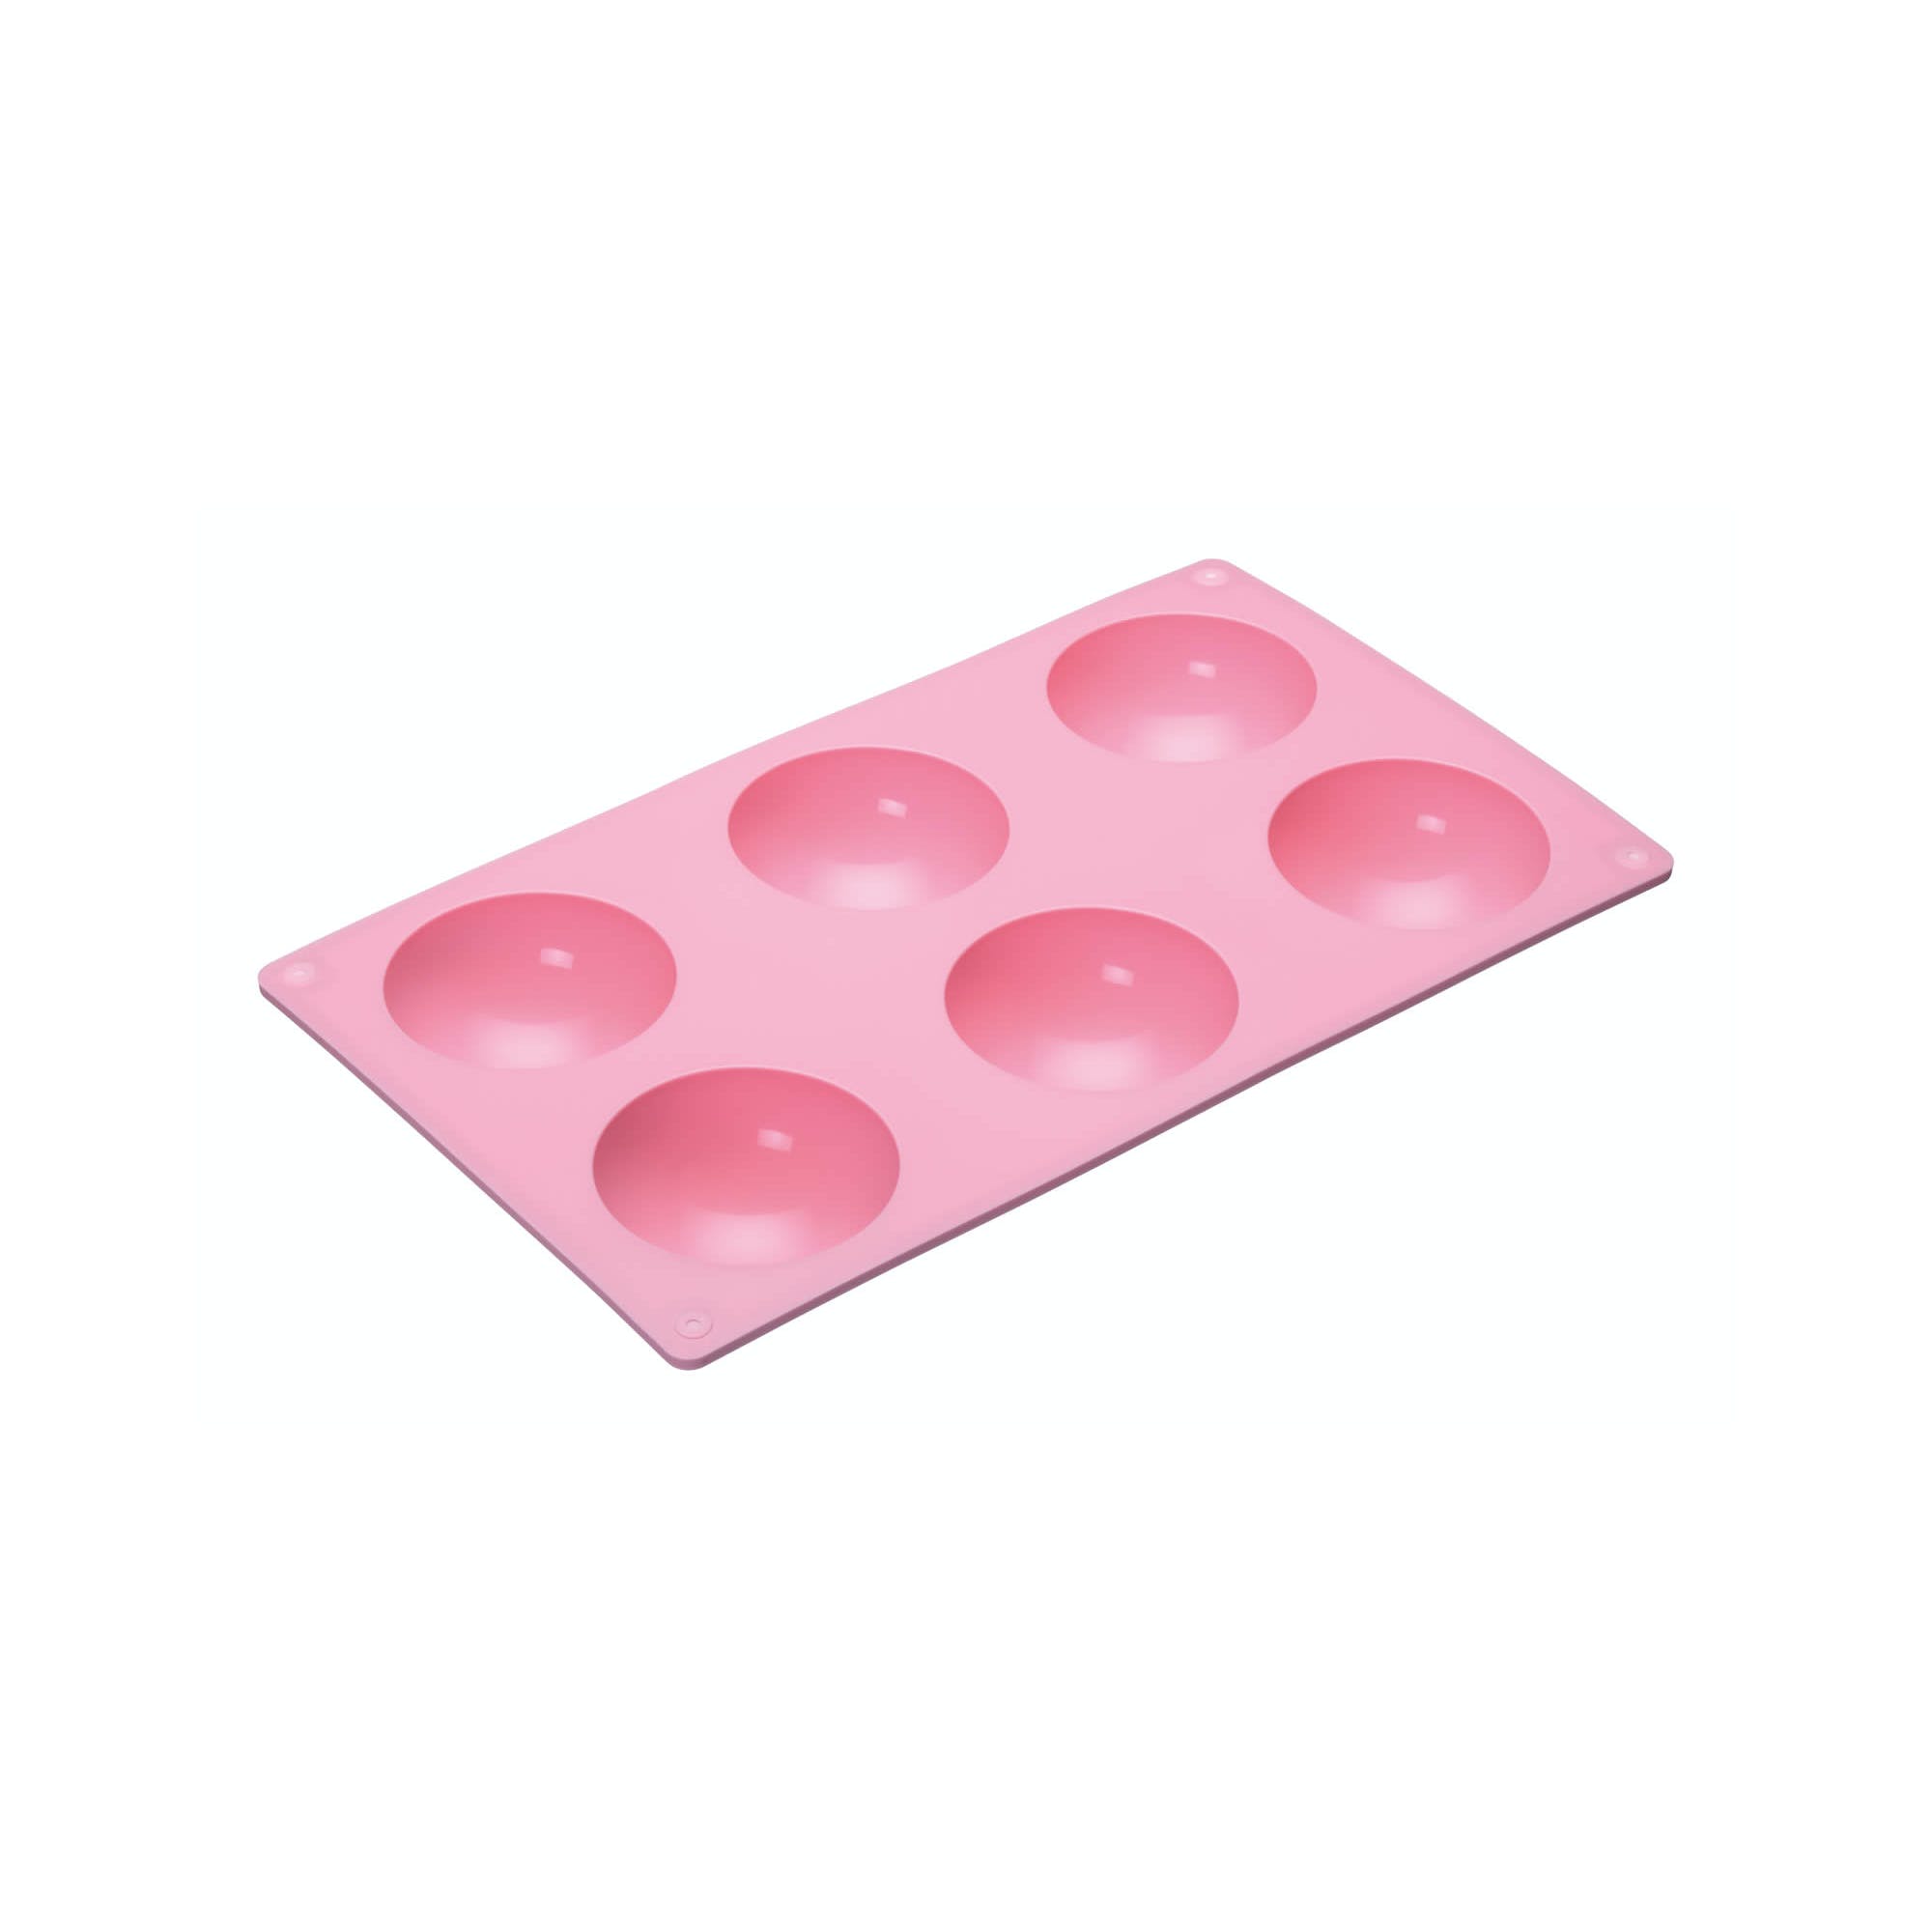 Sweetly Does It Silicone Tea Cake Mould Hemisphere Mould - The Cooks Cupboard Ltd